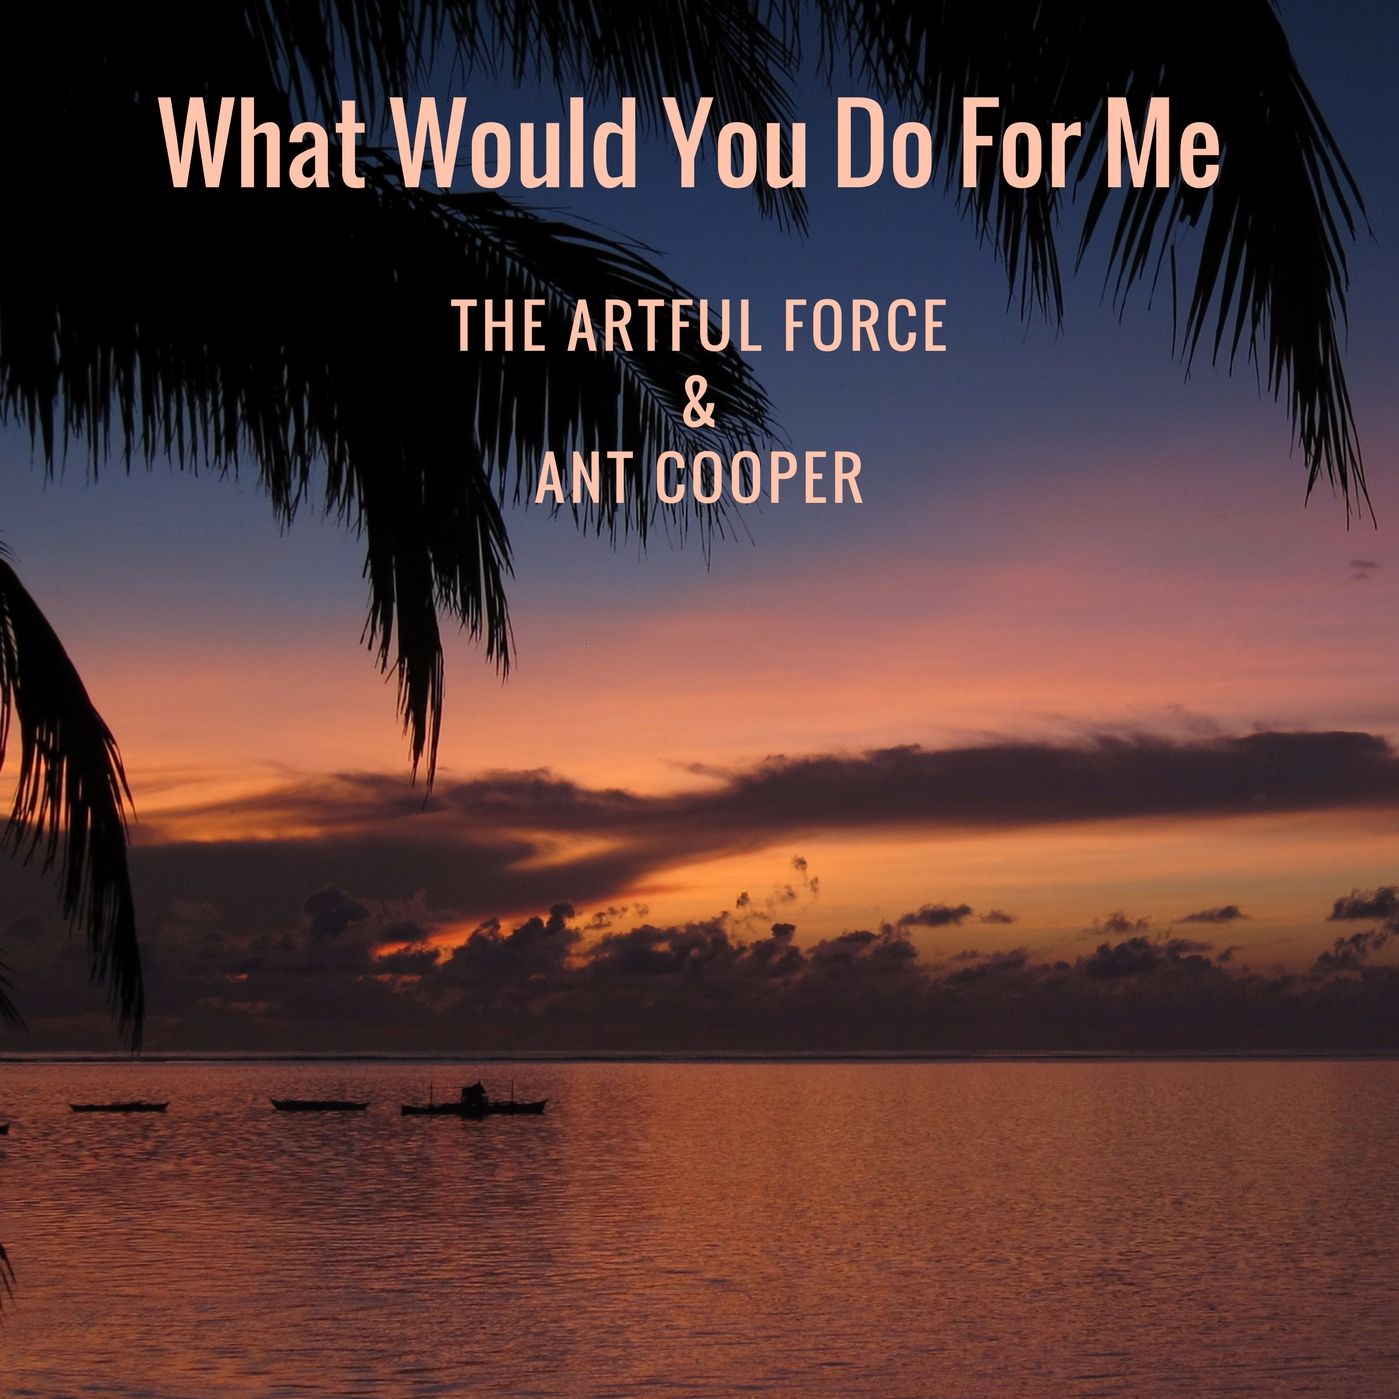 The Artful Force – “What Would You Do For Me”